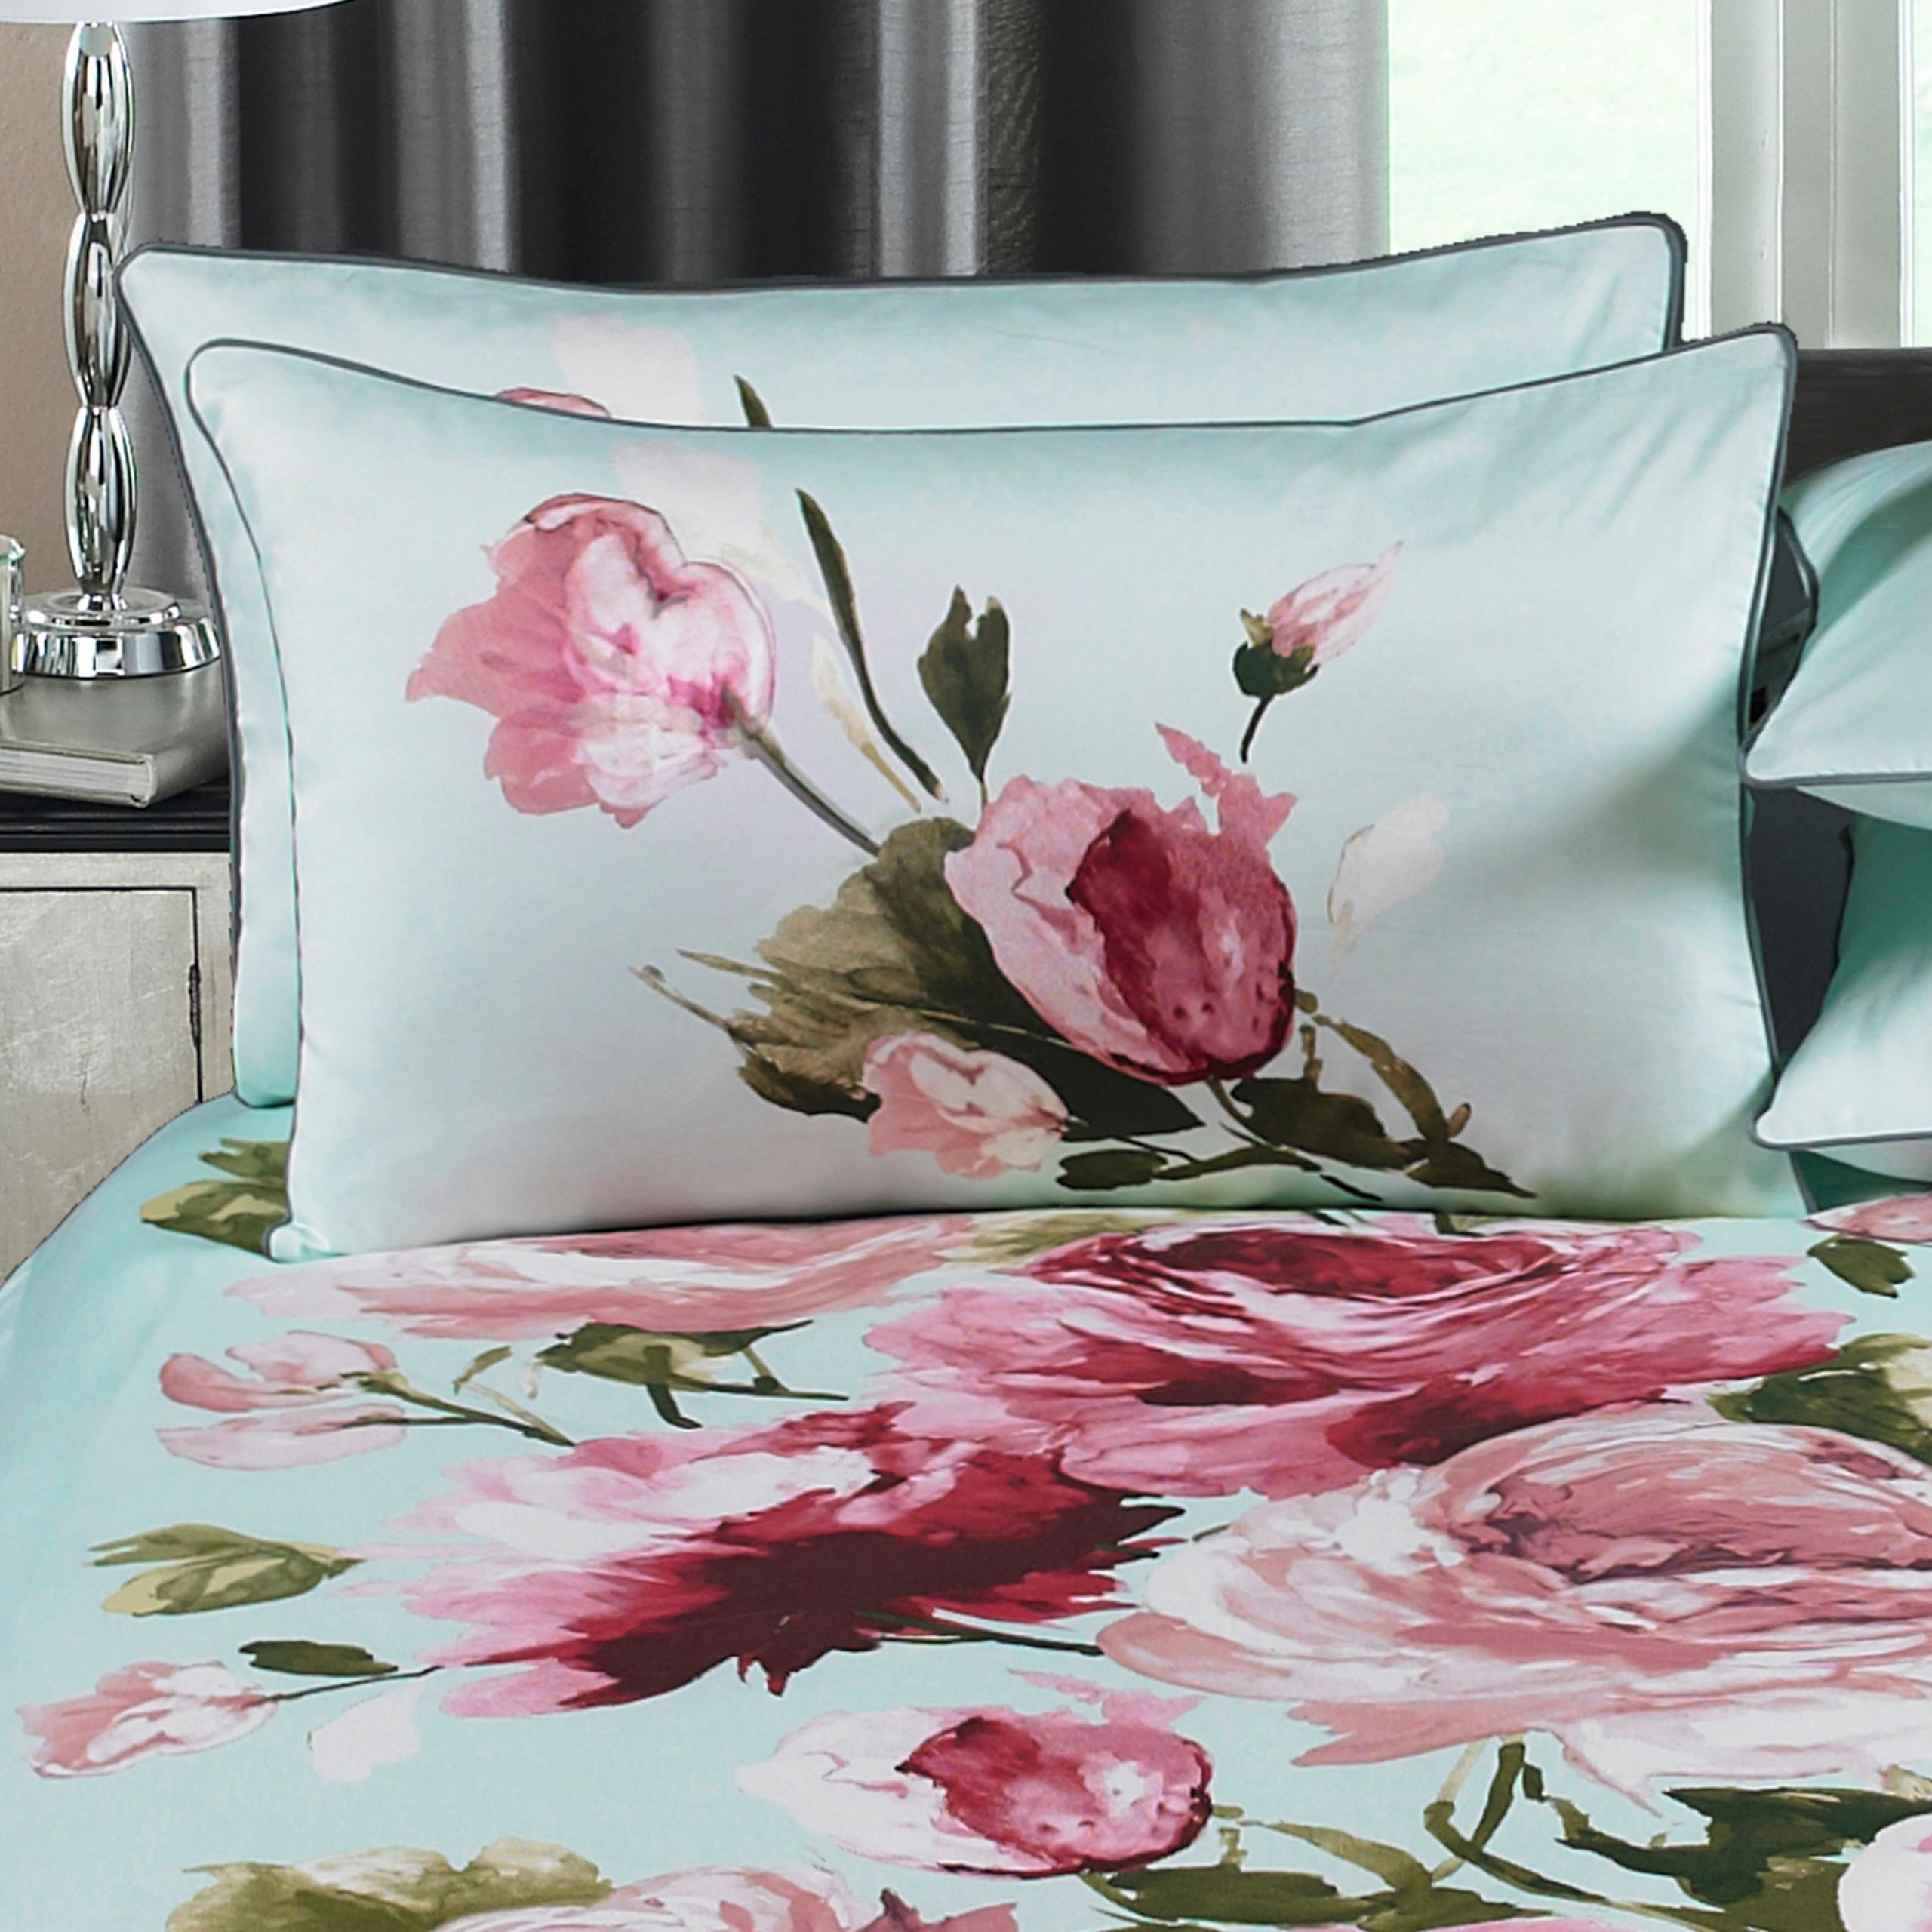 With its strong oriental inspiration, add a burst of floral luxury to your bedroom with the Windsor duvet cover set. Created from the highest quality, 300 thread count sateen cotton, both the duvet cover and pillowcases are silky soft, making it an absolute pleasure to tuck yourself into each night. The large scale floral bloom dominates this beautiful bed linen, which will instantly transform the look in any bedroom setting to create a colourful, vibrant interior display. Each duvet has a secure button closure and comes with fully matching envelope-style pillowcases. For the best finish machine wash at 60 degrees and iron on a hot setting.